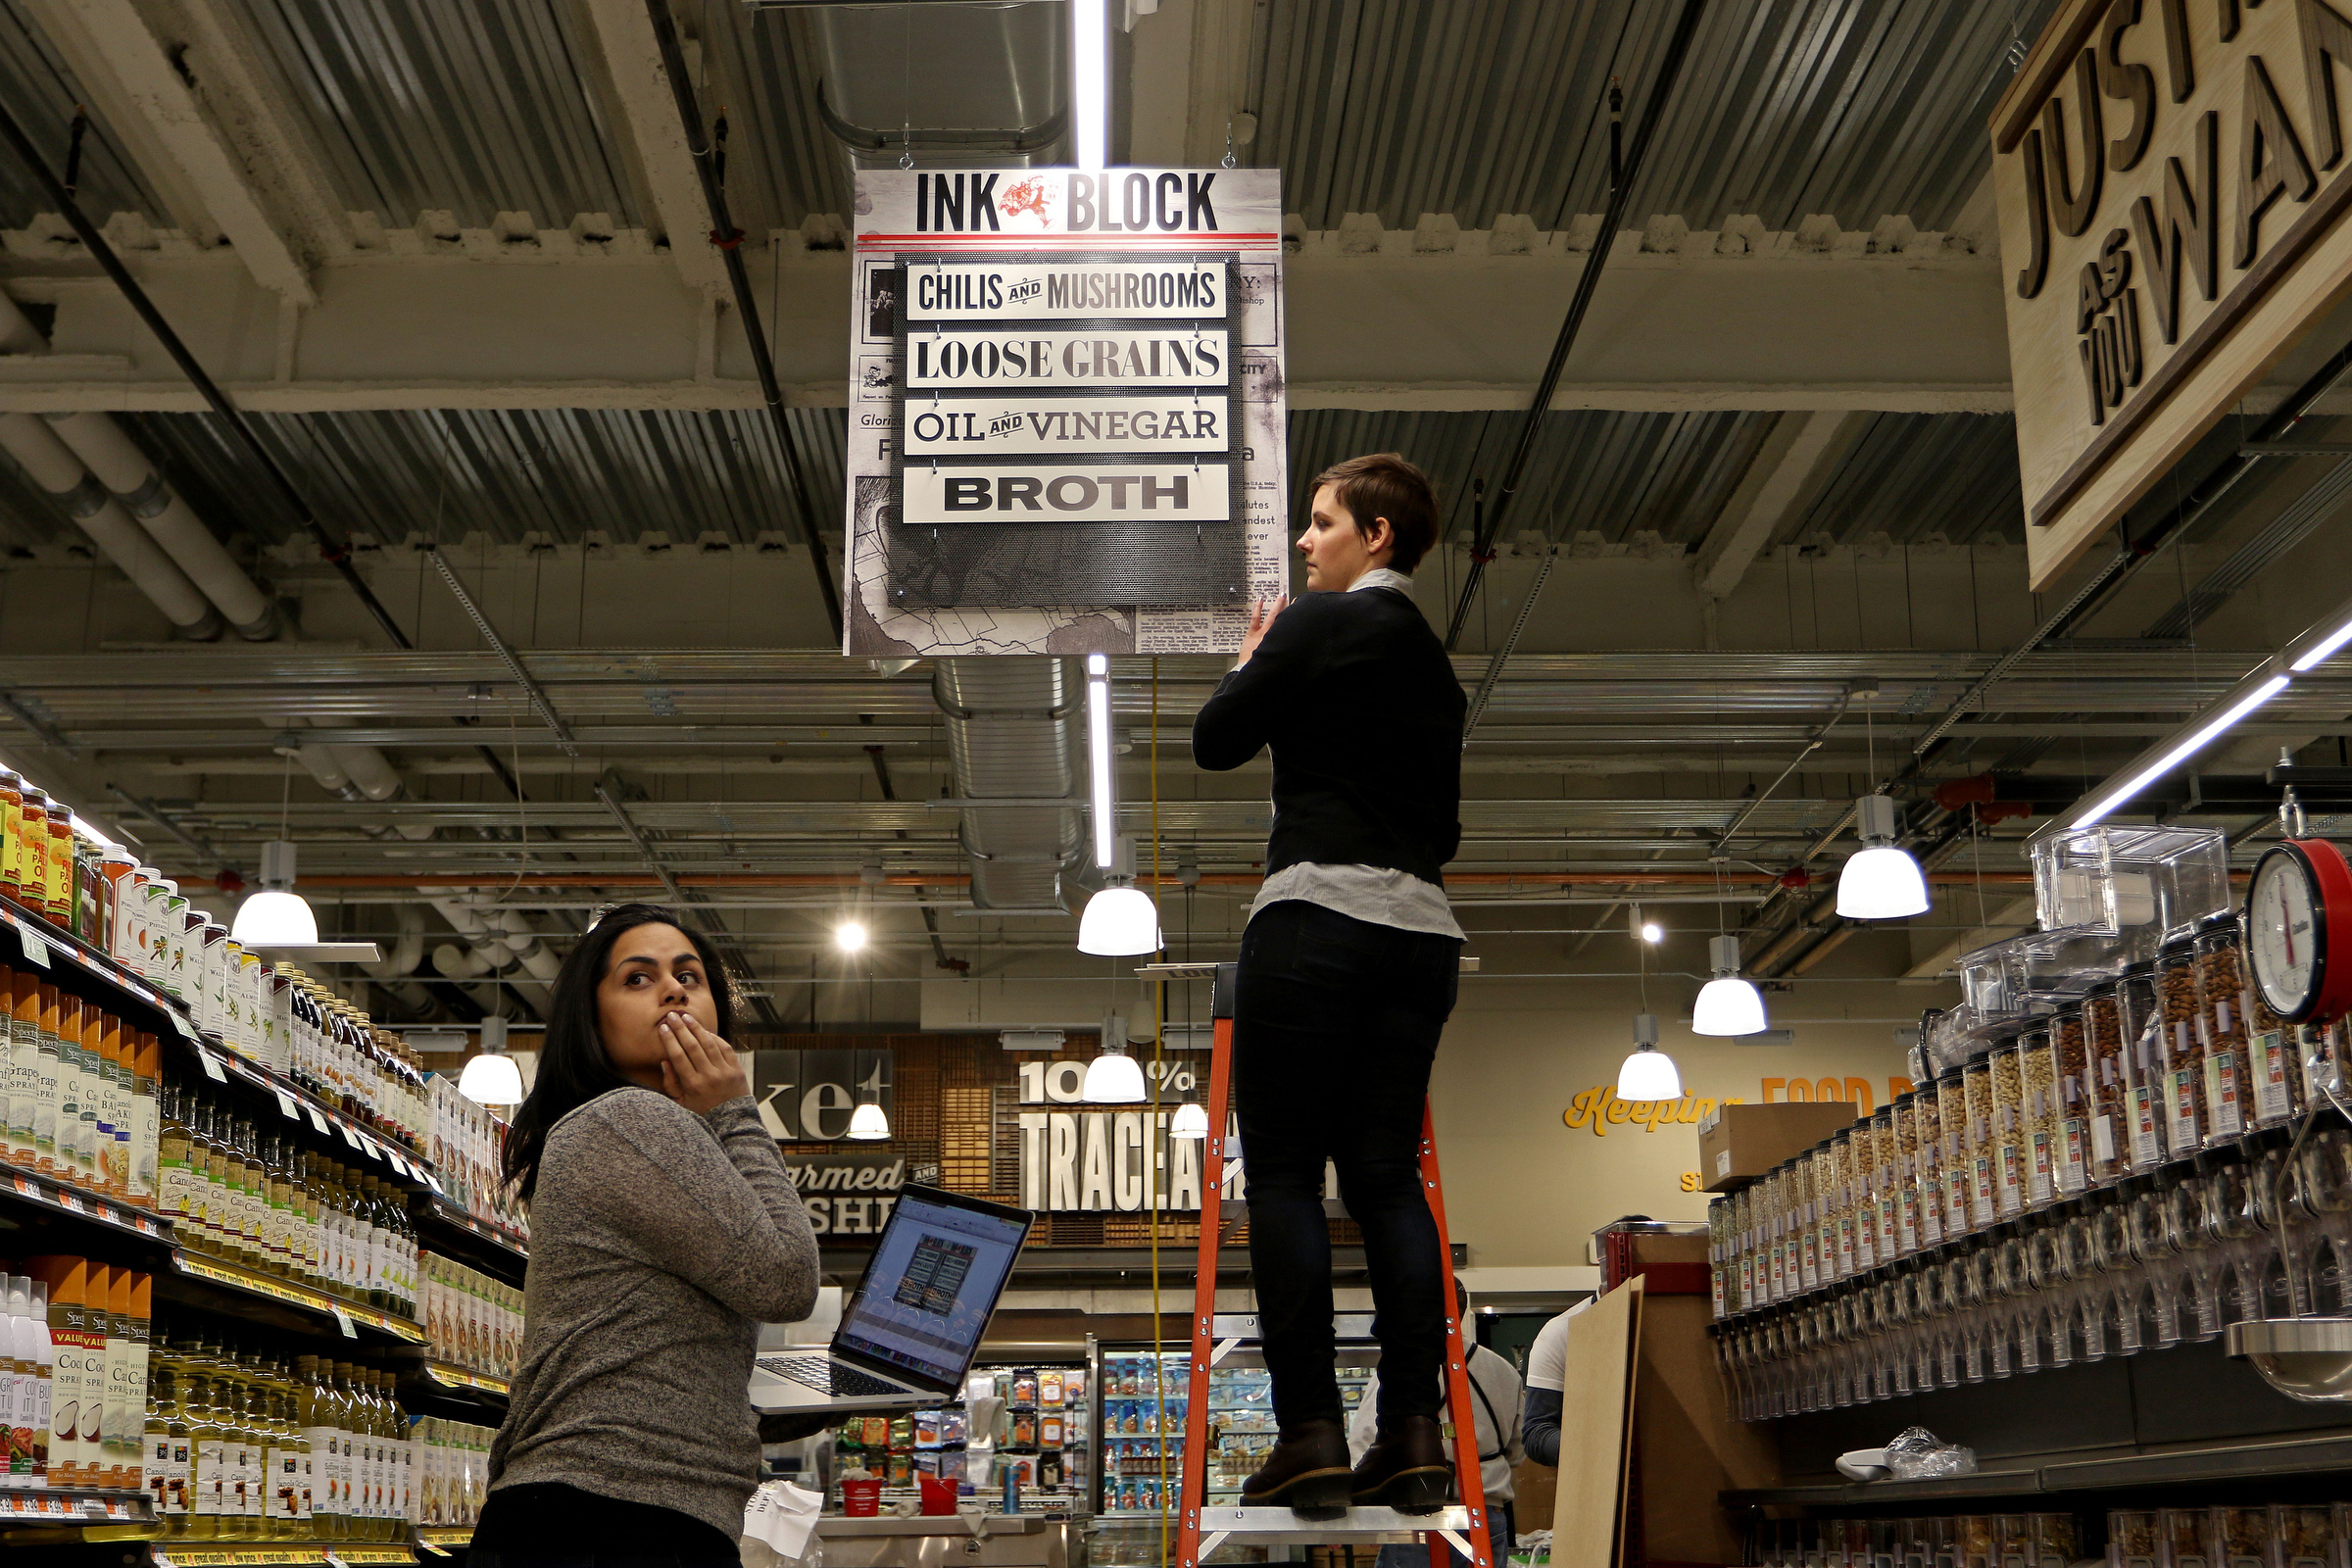 PHOTO: Two employees puts up signage at a new Whole Foods Market in the South End neighborhood of Boston, Mass. on Jan. 6, 2015.